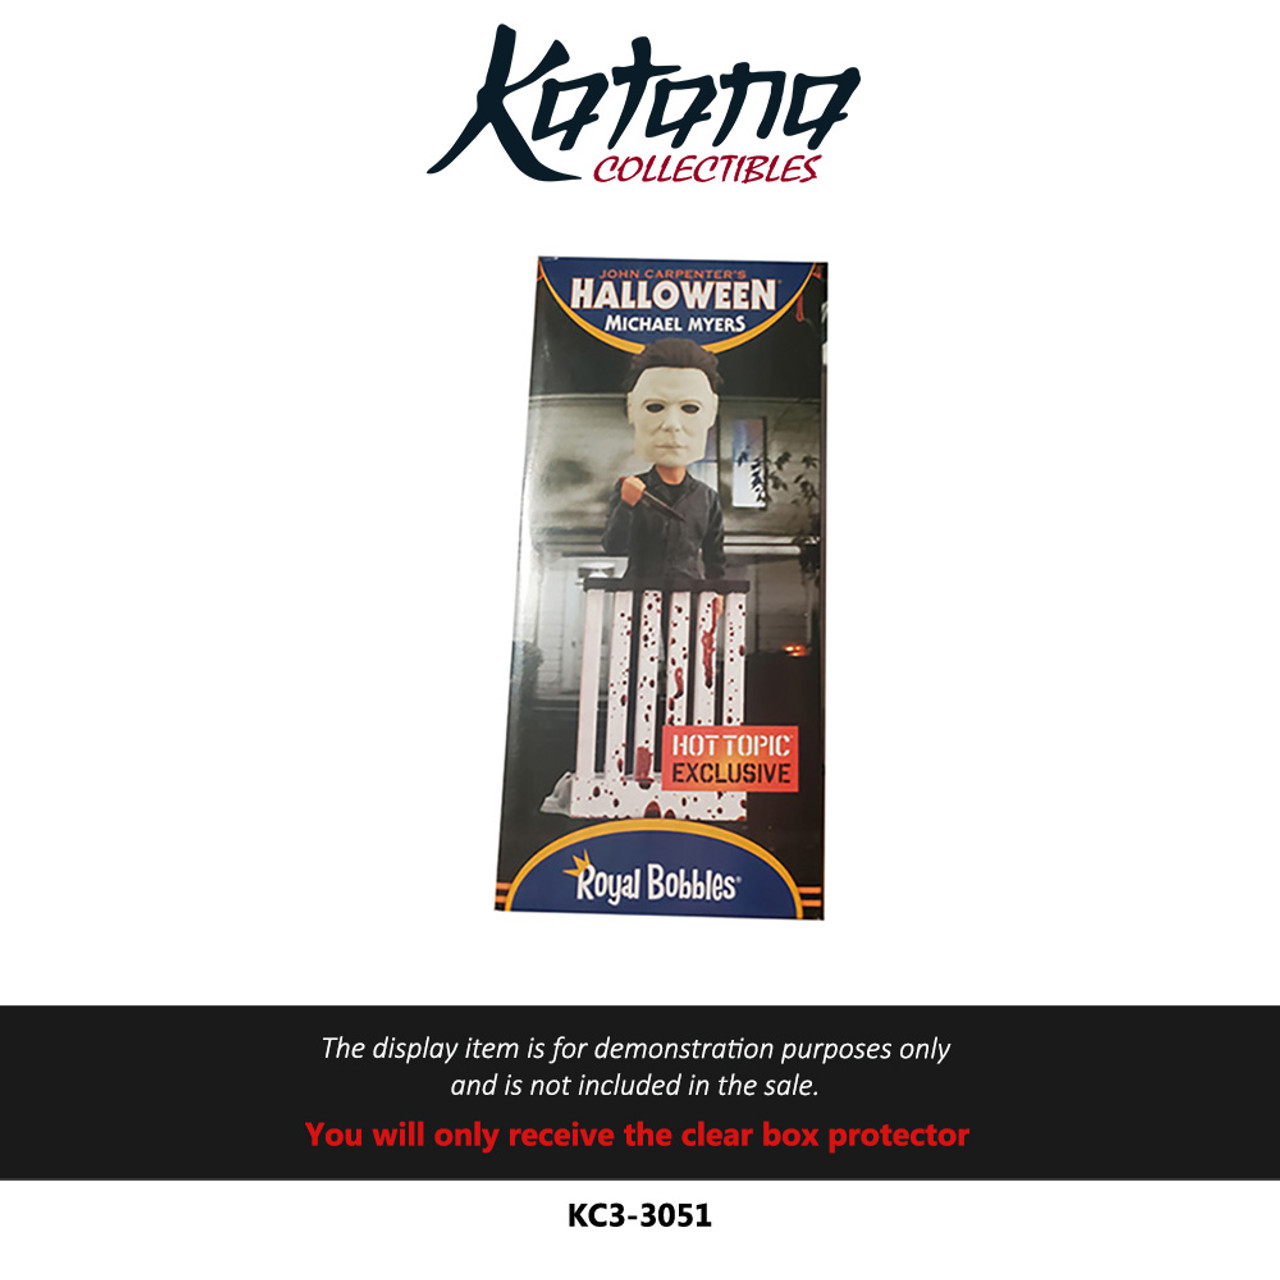 Katana Collectibles Protector For Royal Bobbles Halloween Michael Myers Hot Topic Exclusive